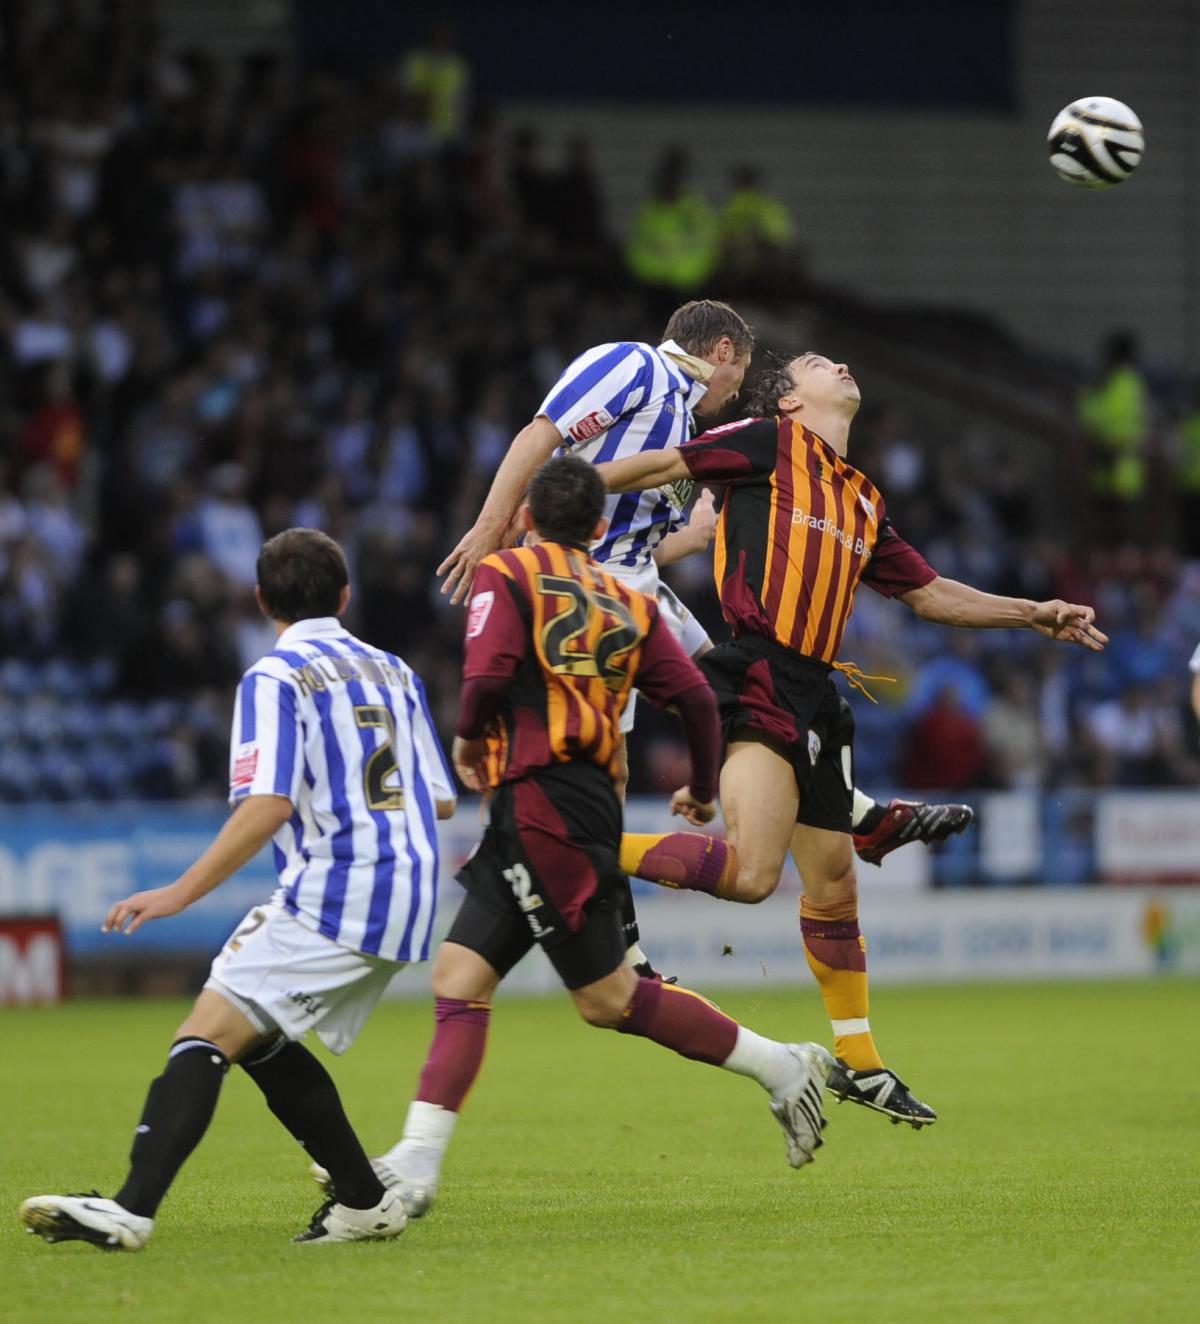 Carling Cup action from Huddersfield v City